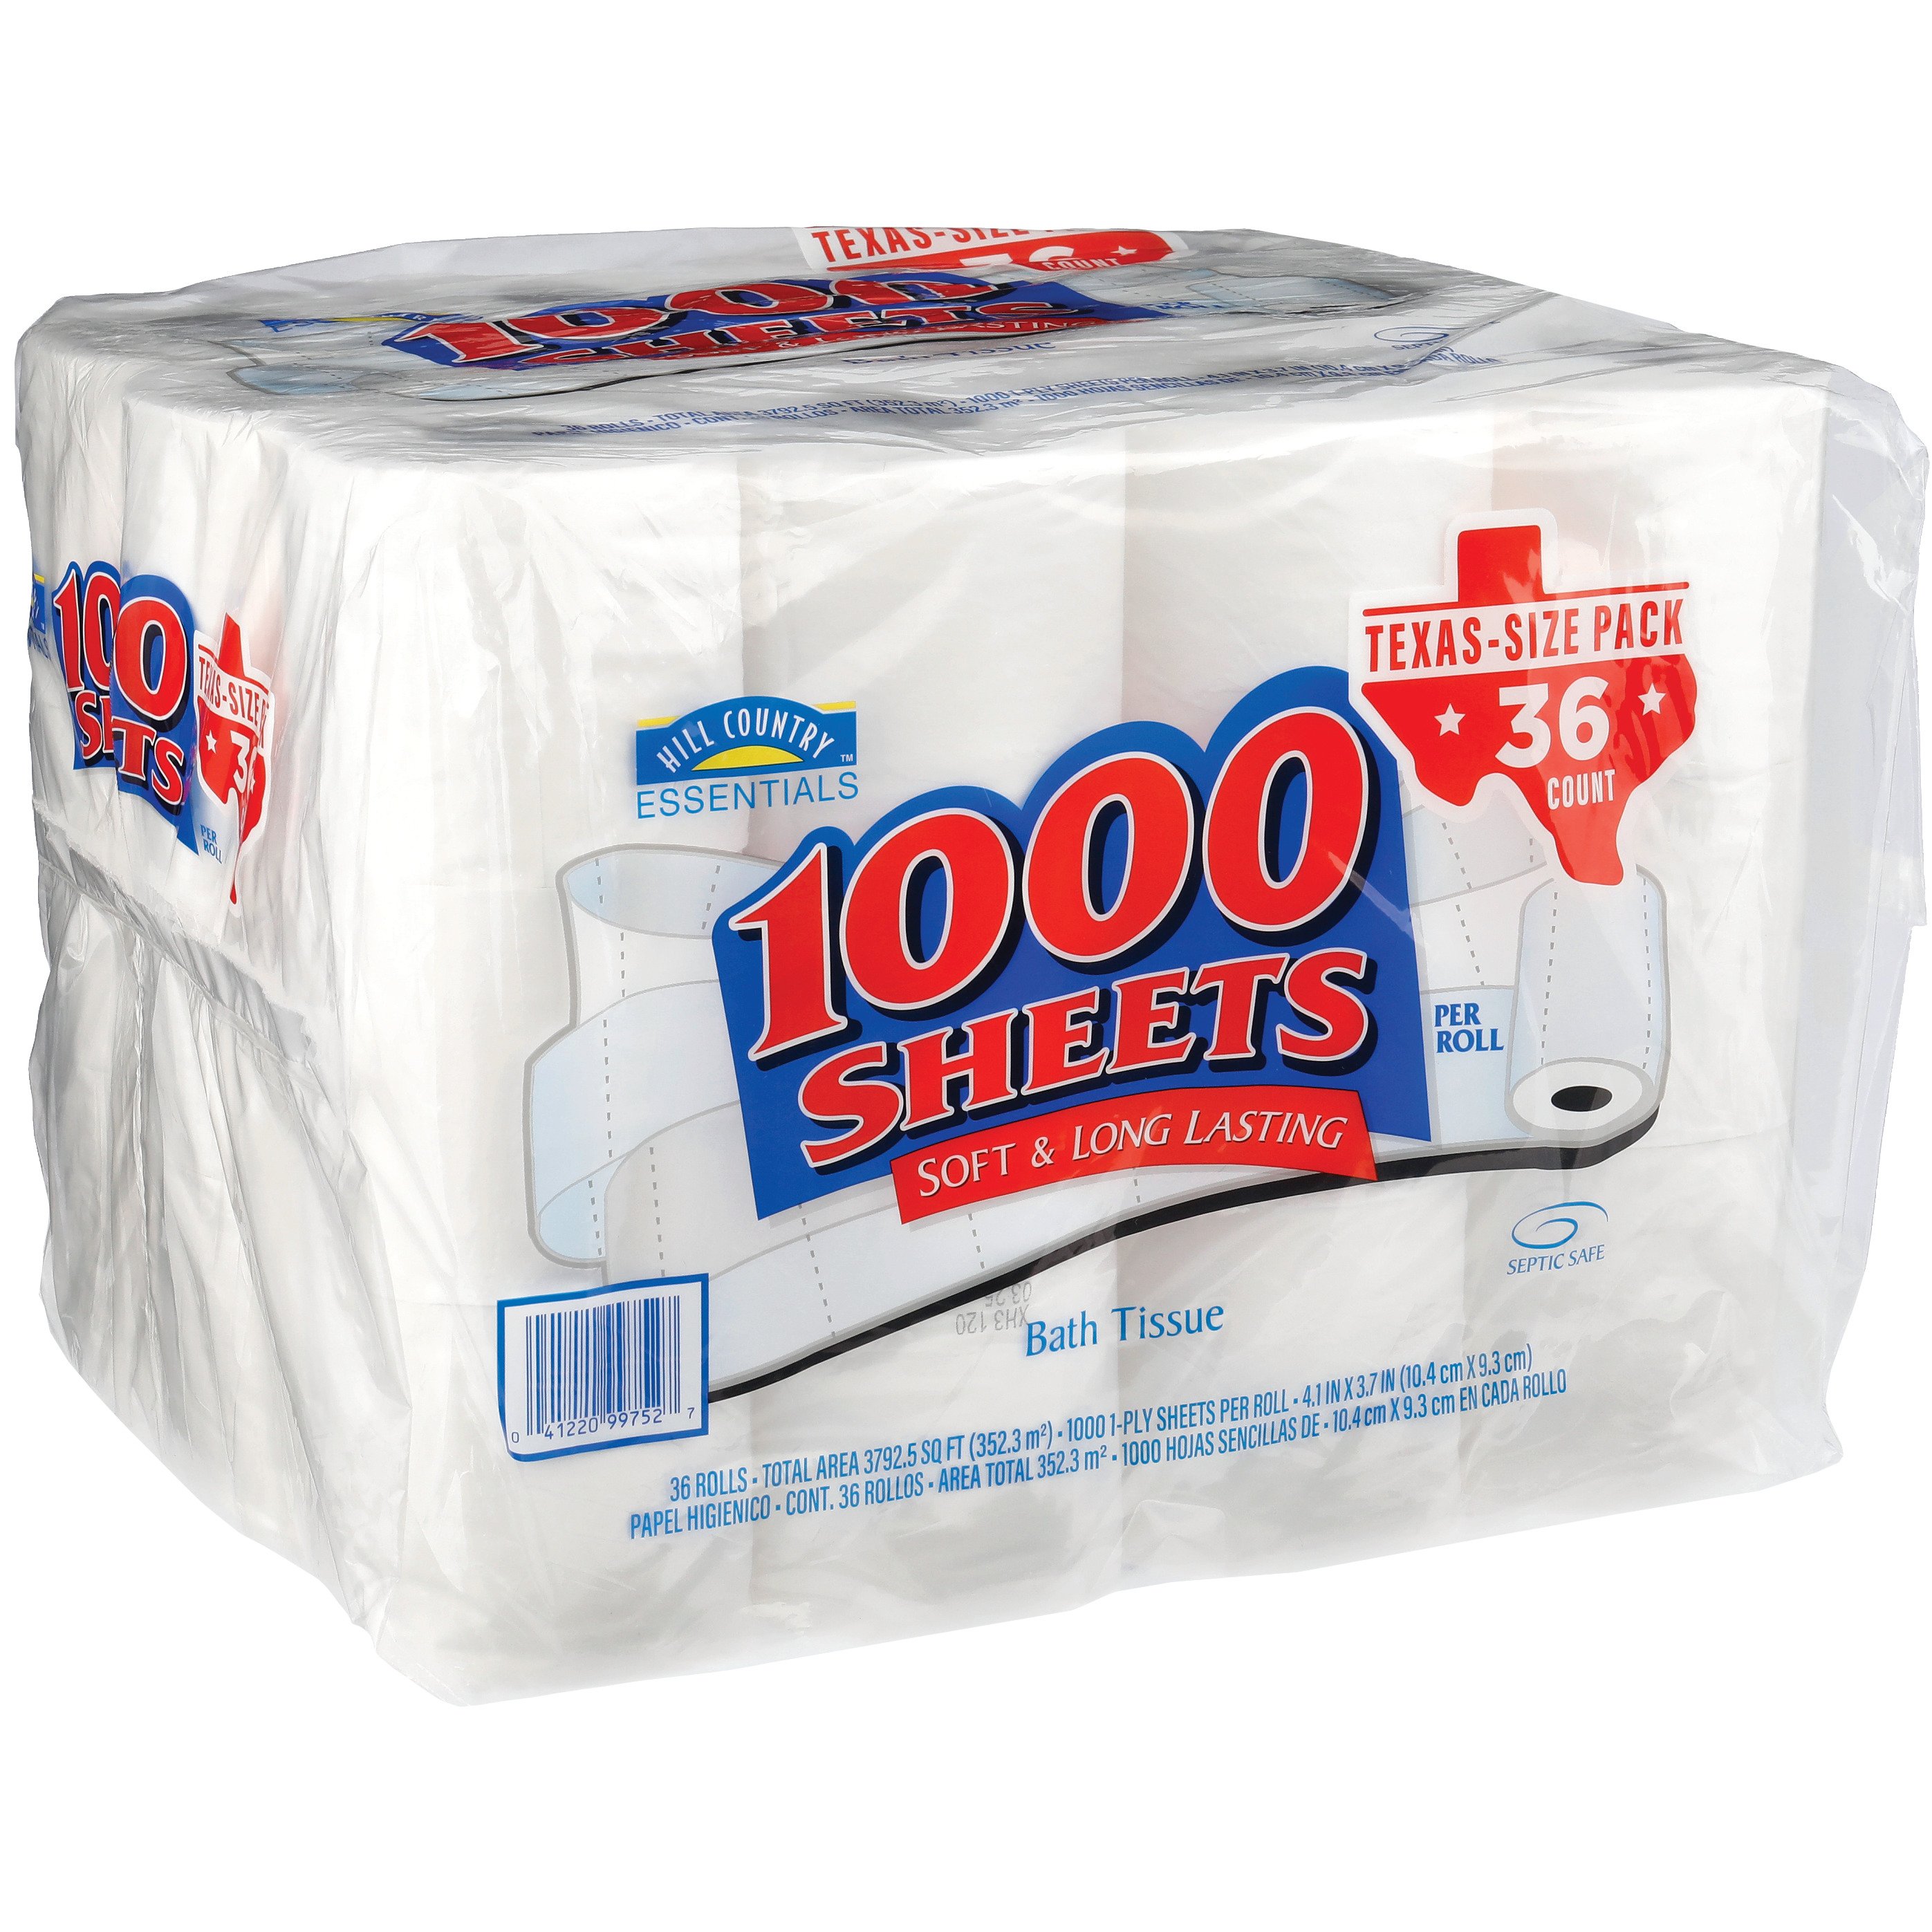 Hill Country Essentials 1000 Sheets Soft Toilet Paper - Texas-Size Pack ...